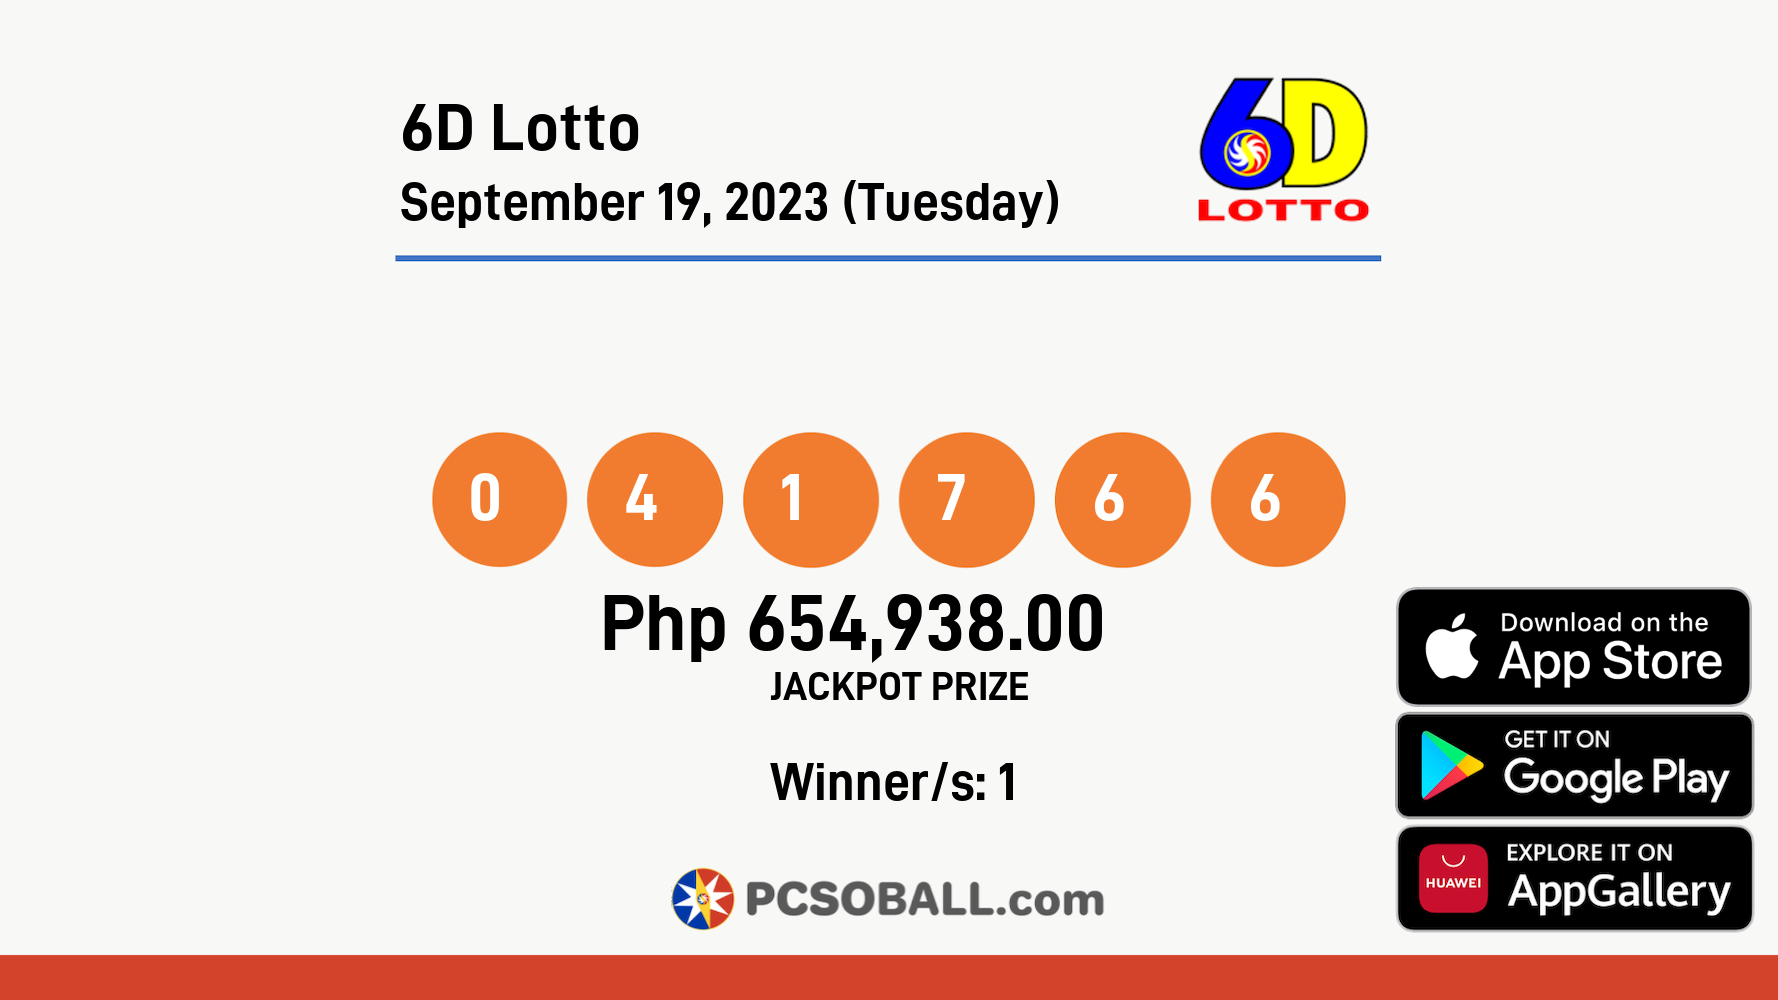 6D Lotto September 19, 2023 (Tuesday) Result